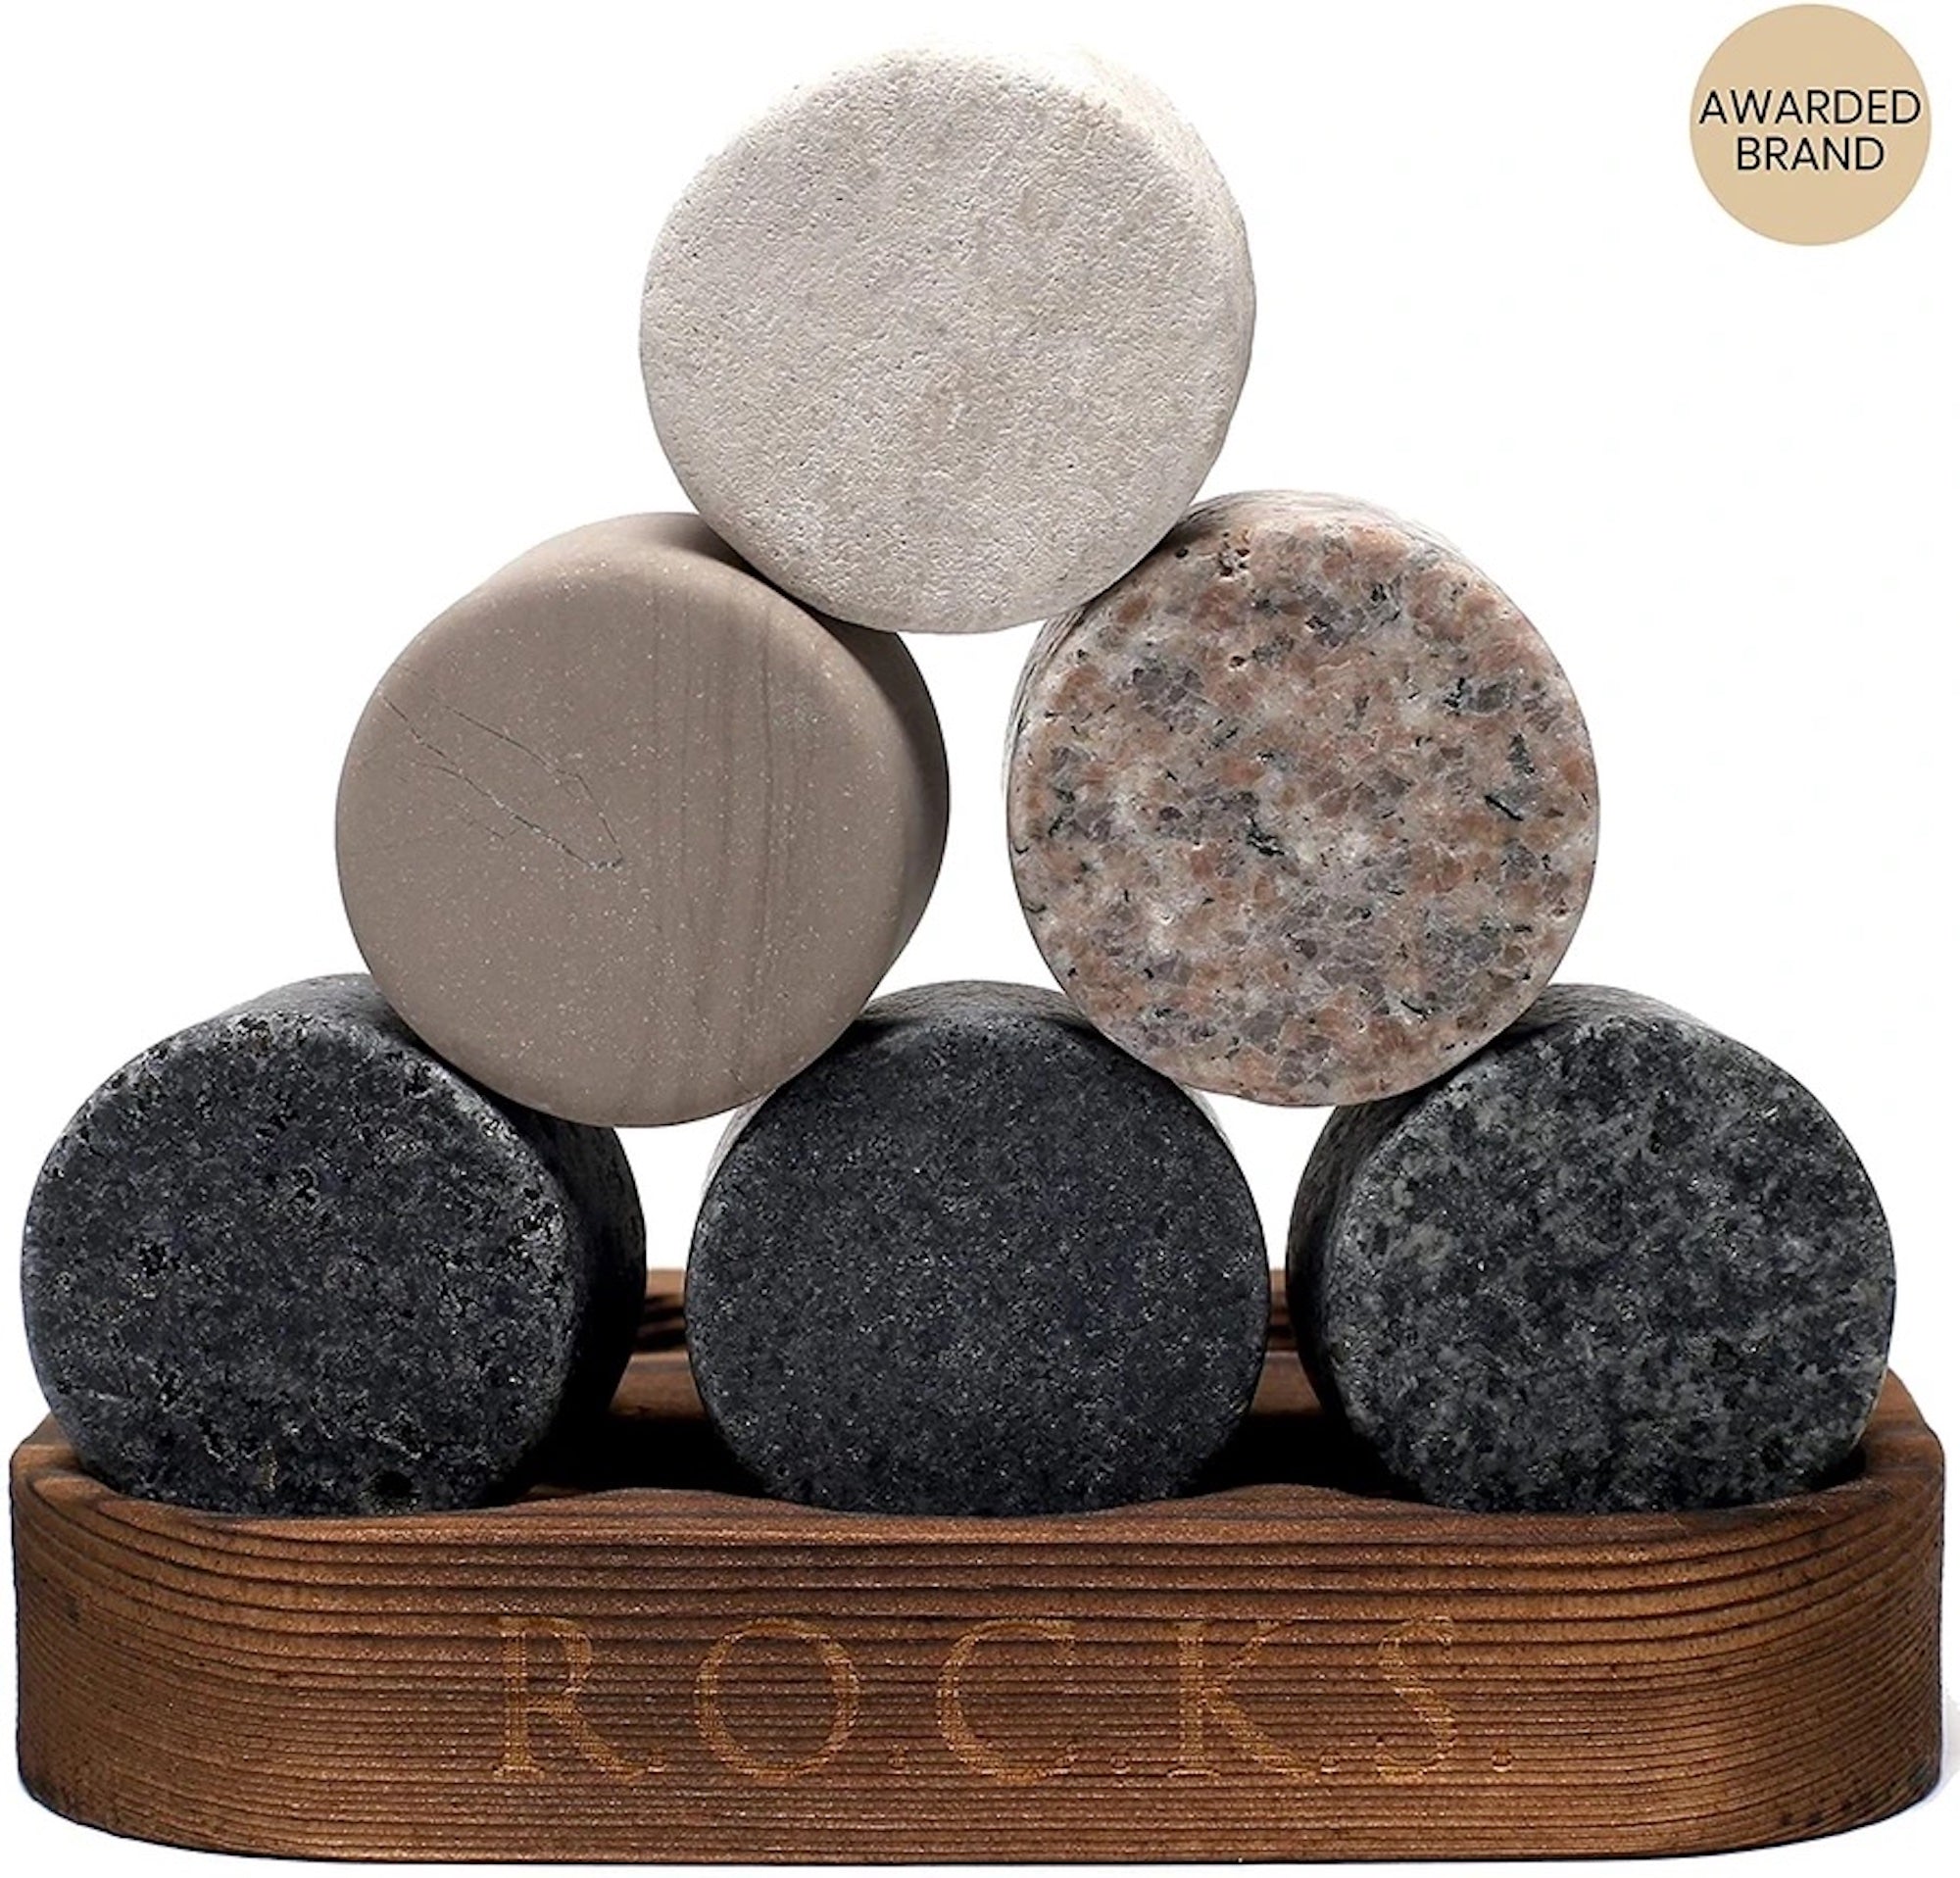 Benefits of using Whisky chilling stones